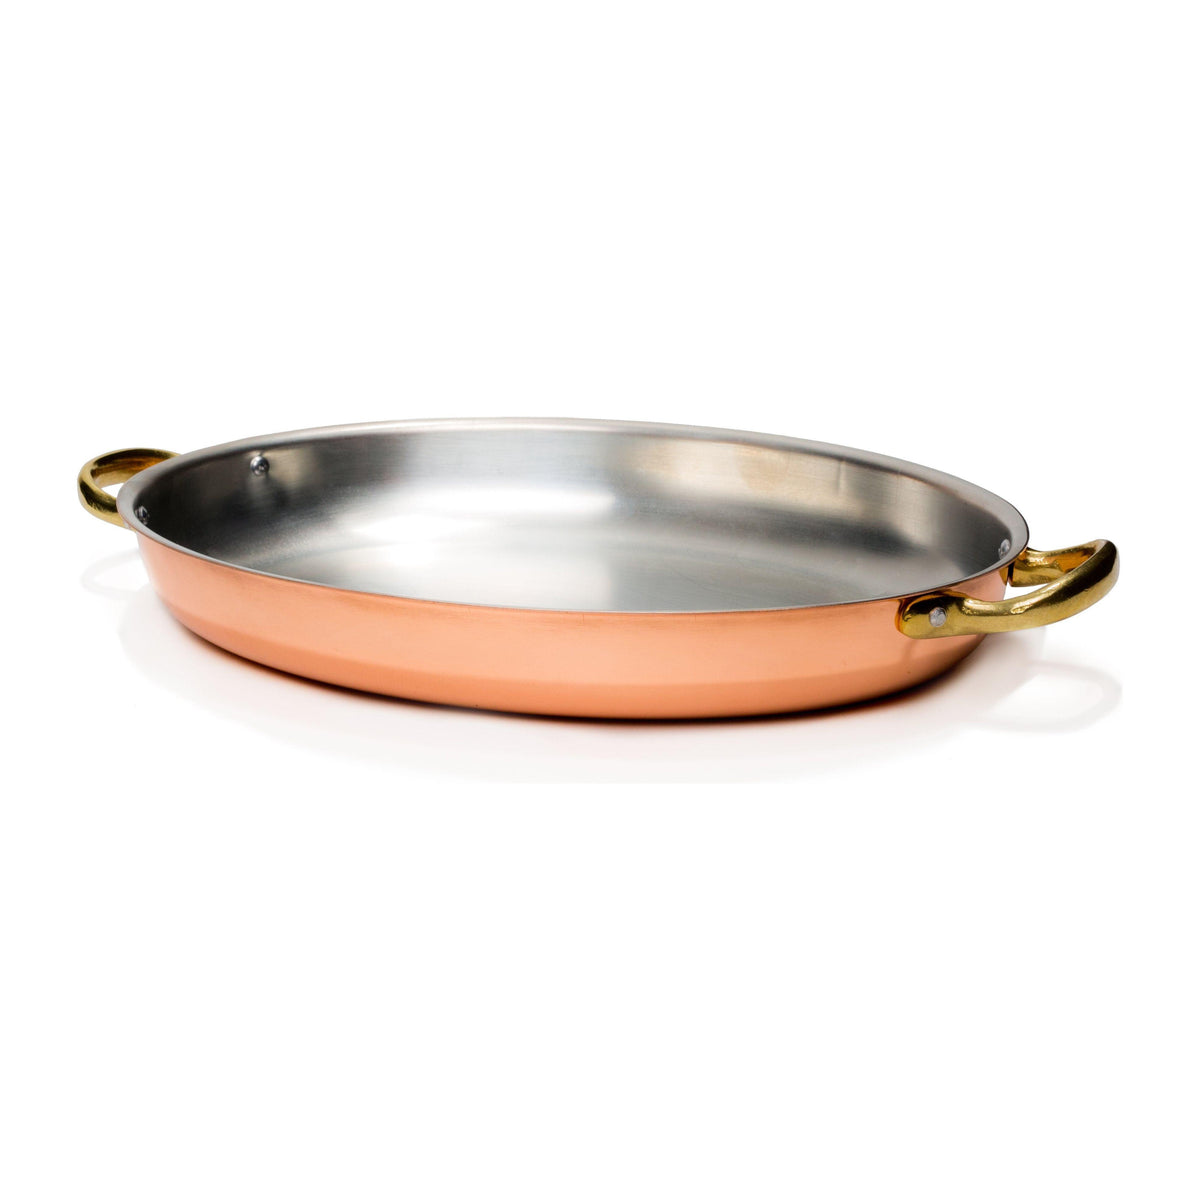 Large Oval Copper Pan With Handles 38cm x 23cm - BESPOKE77